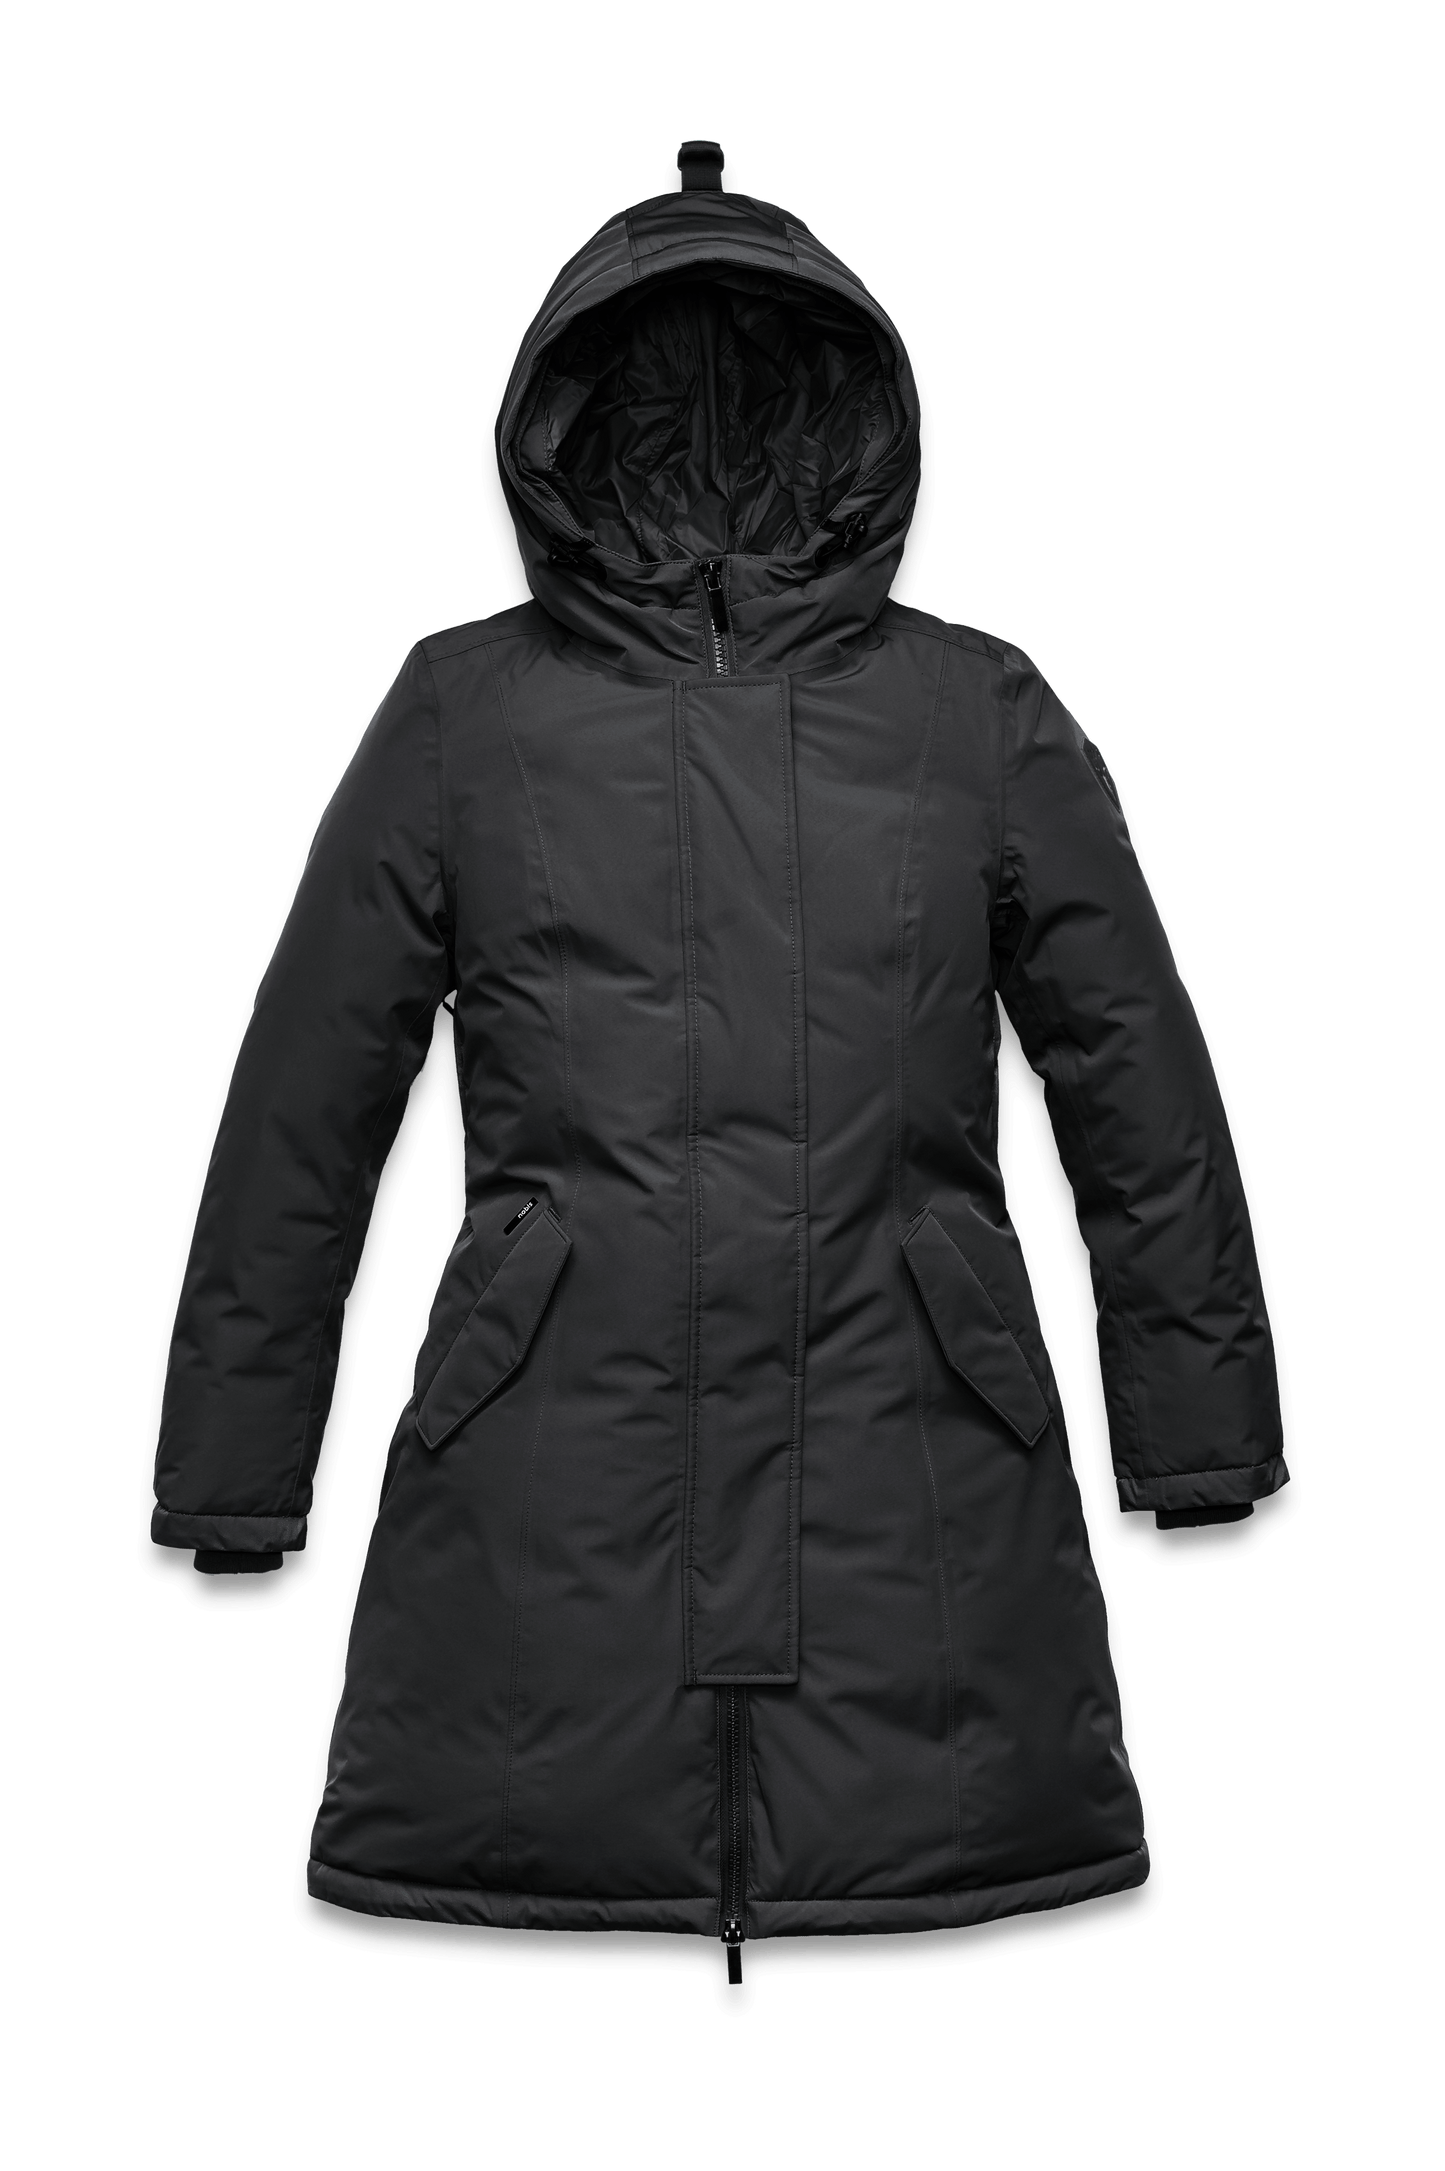 Ladies thigh length down-filled parka with non-removable hood in Black